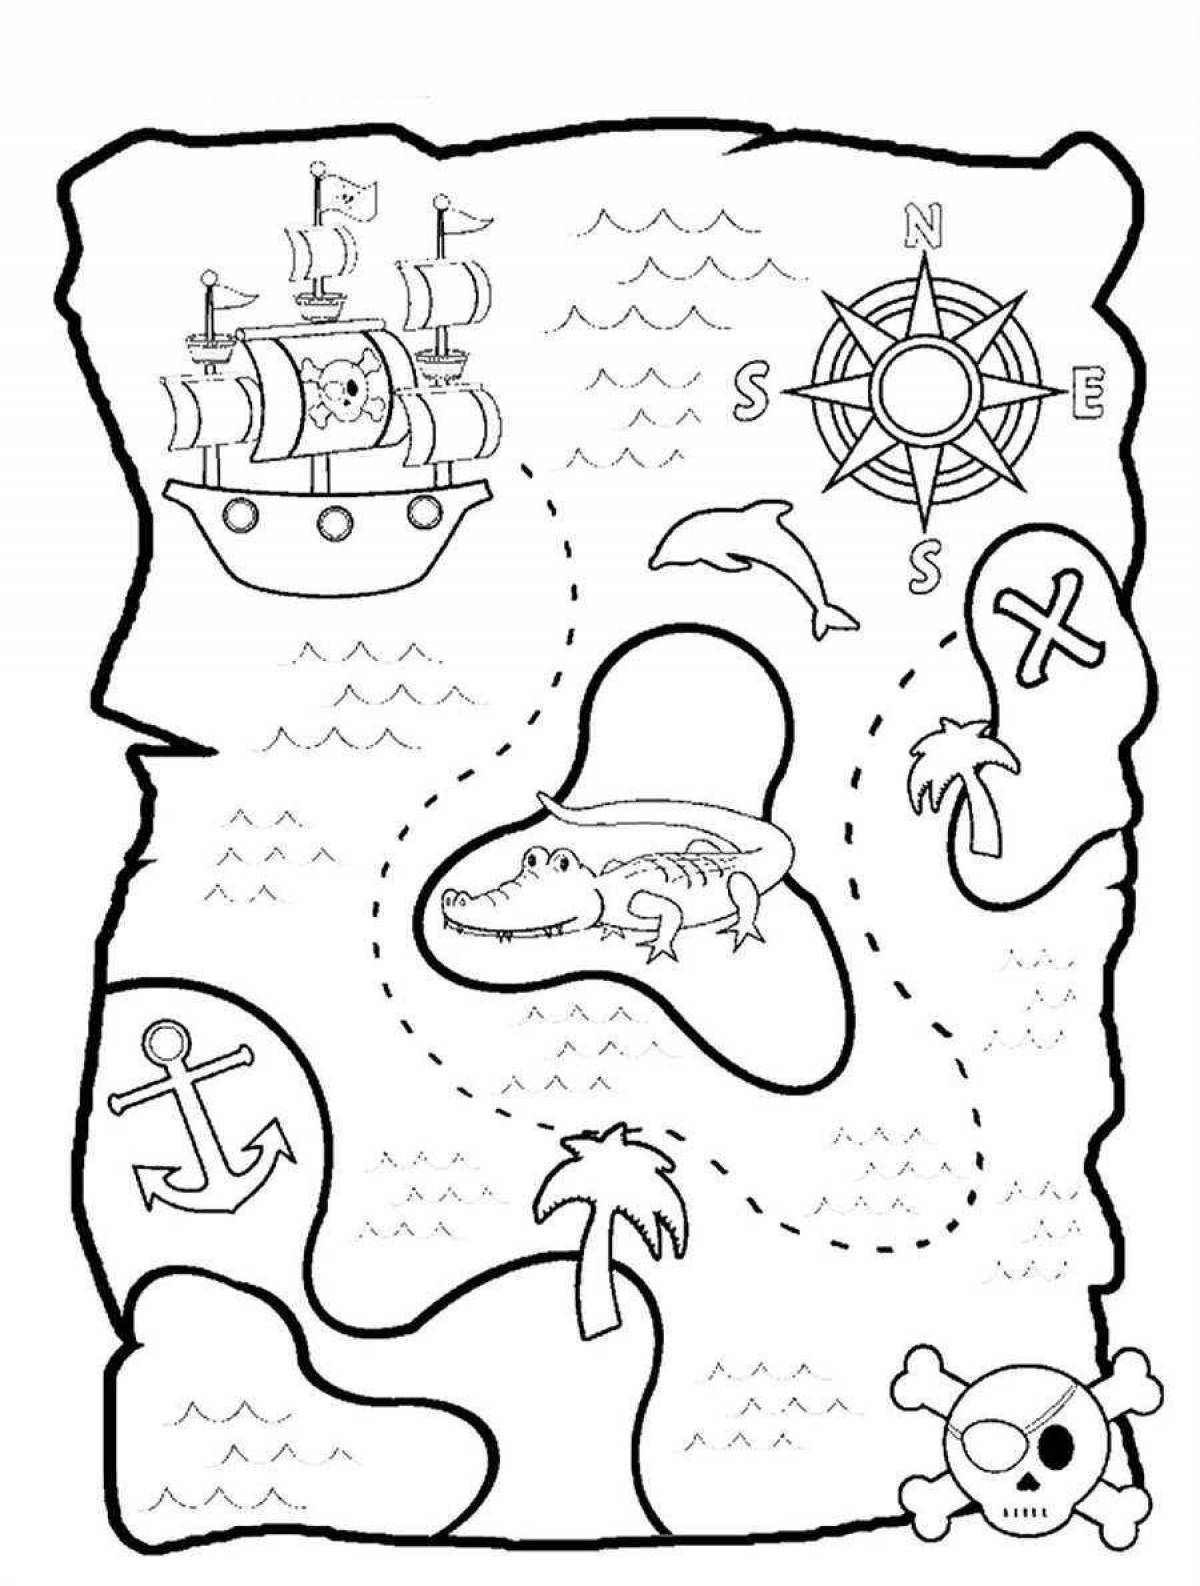 Great pirate map coloring page